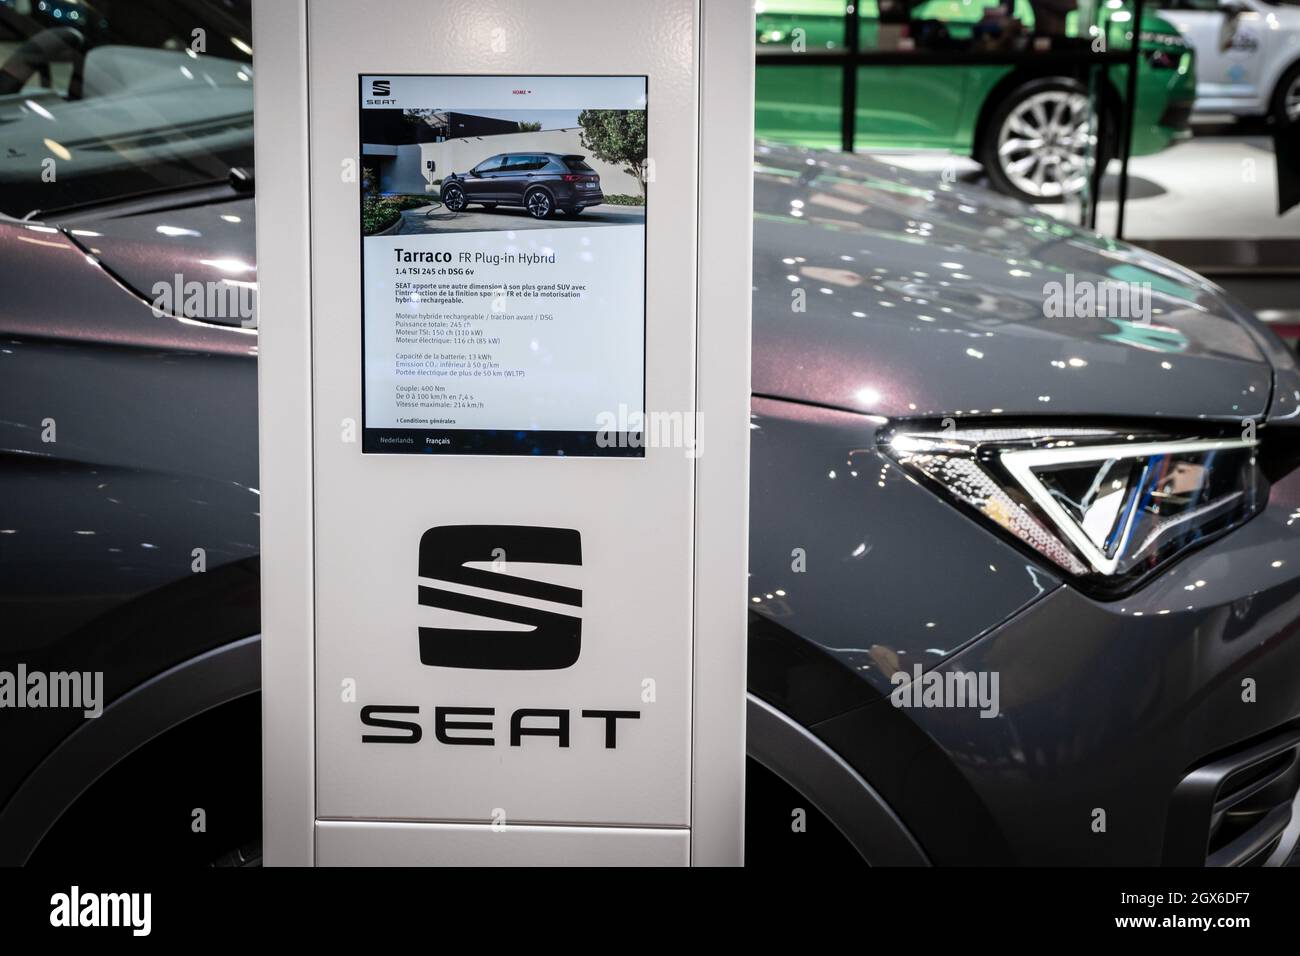 Information board of the Seat Tarraco FR Plug-in Hybrid car showcased at the Autosalon 2020 Motor Show. Brussels, Belgium - January 9, 2020. Stock Photo